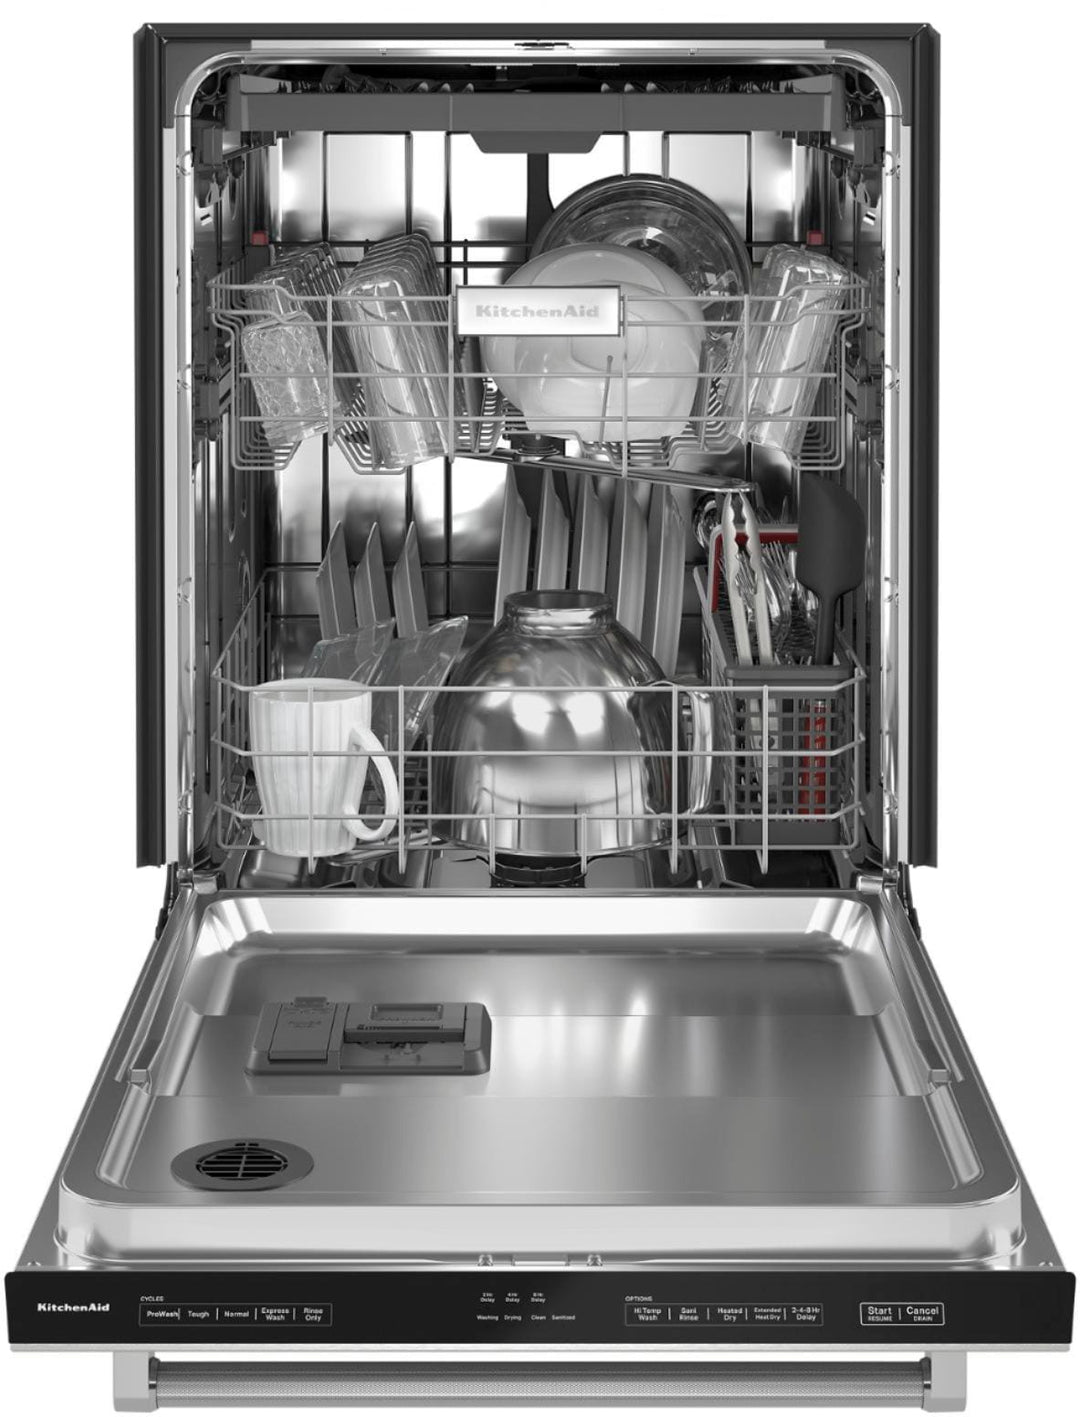 KitchenAid - 24" Top Control Built-In Dishwasher with Stainless Steel Tub, PrintShield Finish, 3rd Rack, 39 dBA - Stainless Steel with PrintShield Finish_8